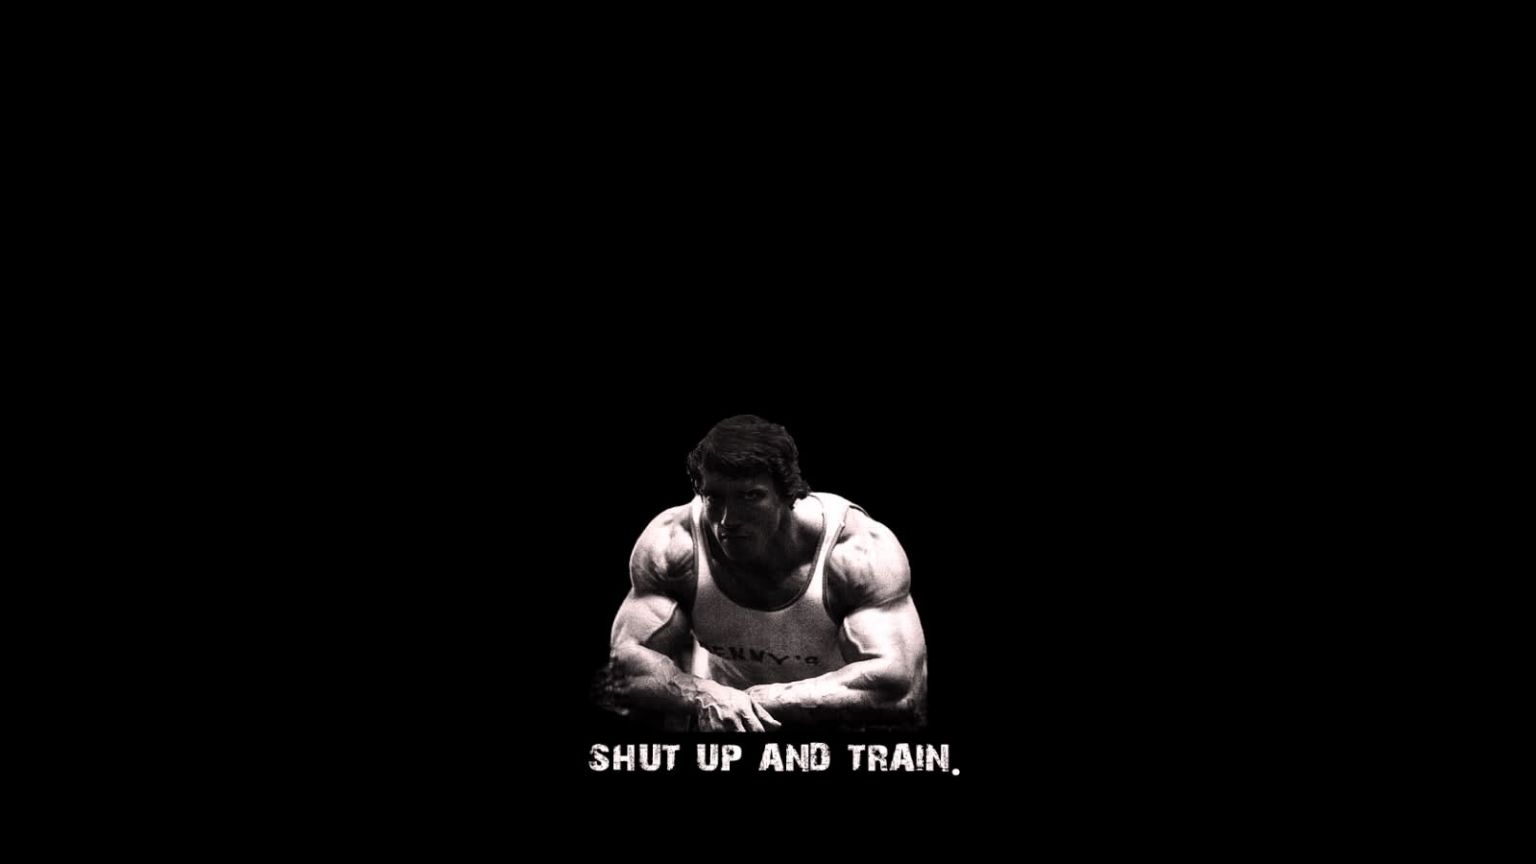 Free download Beast Motivation Arnold Shut up and train Wallpaper [1600x1000] for your Desktop, Mobile & Tablet. Explore Arnold Motivational Wallpaper. Arnold Motivational Wallpaper, Arnold Wallpaper, Hey Arnold! Wallpaper